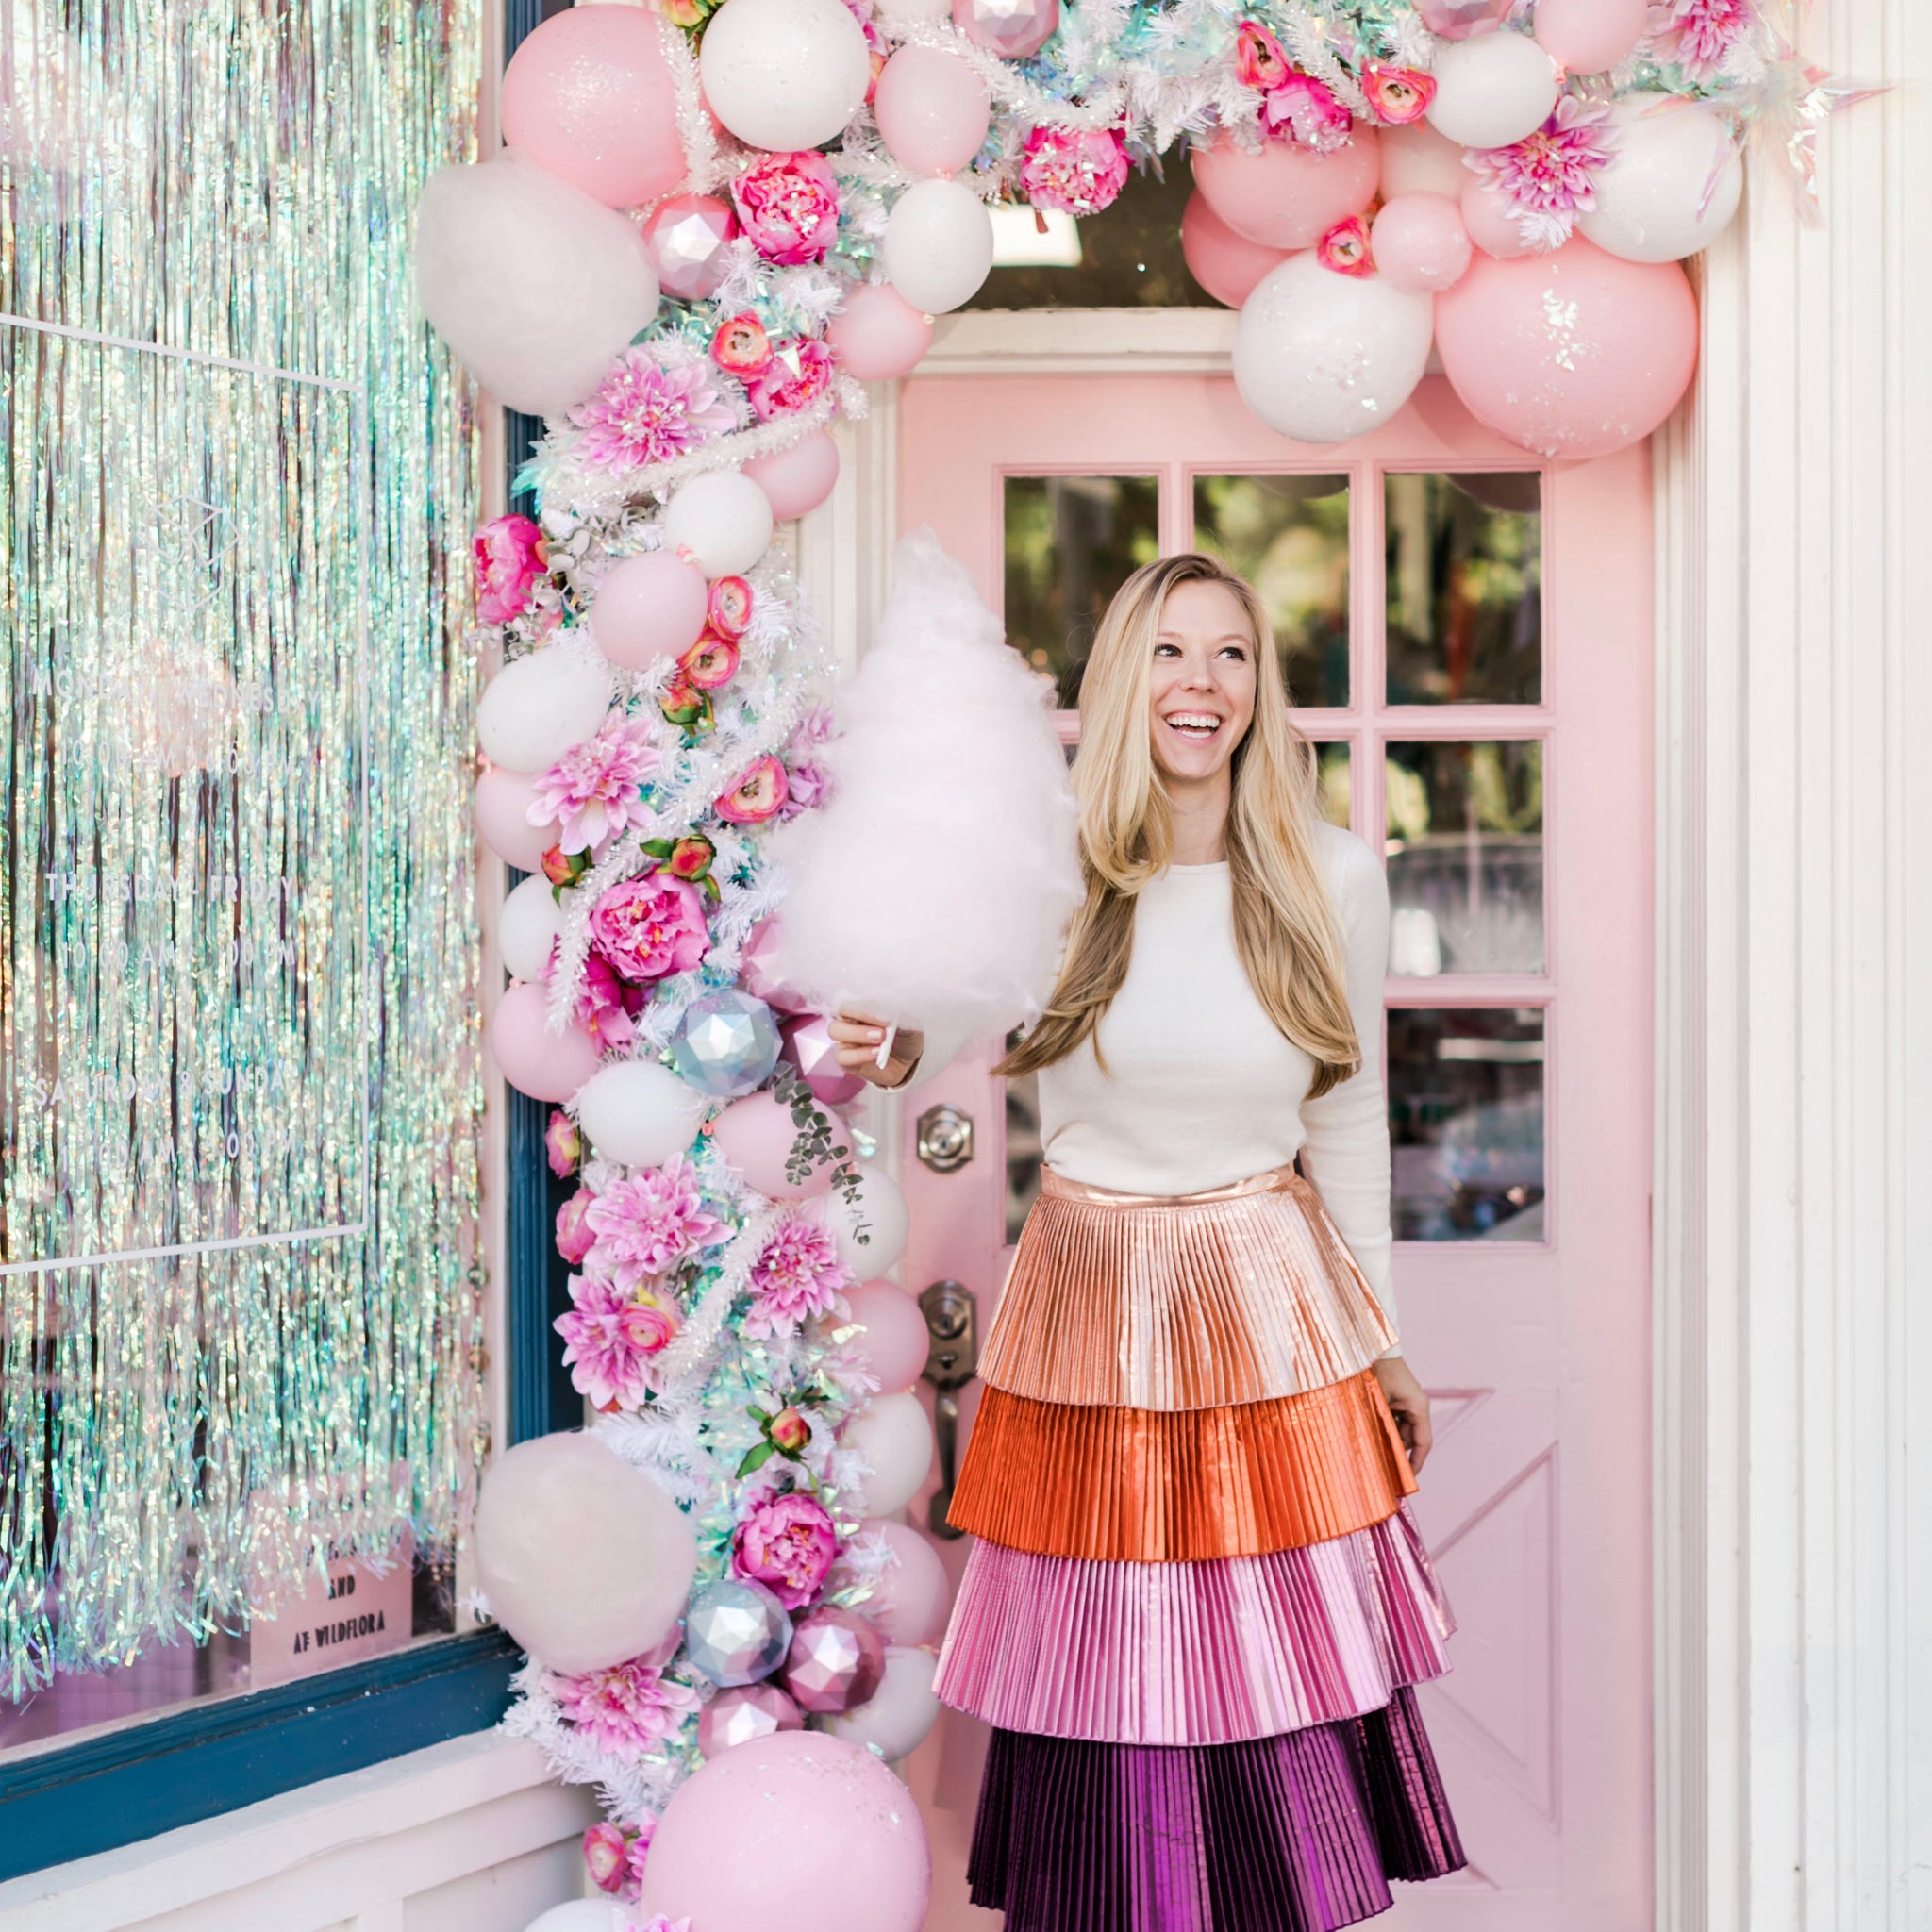 Rachel Huntington, founder of Bonjour Fete holds a cotton candy in front of a pink door decorated with balloons. 